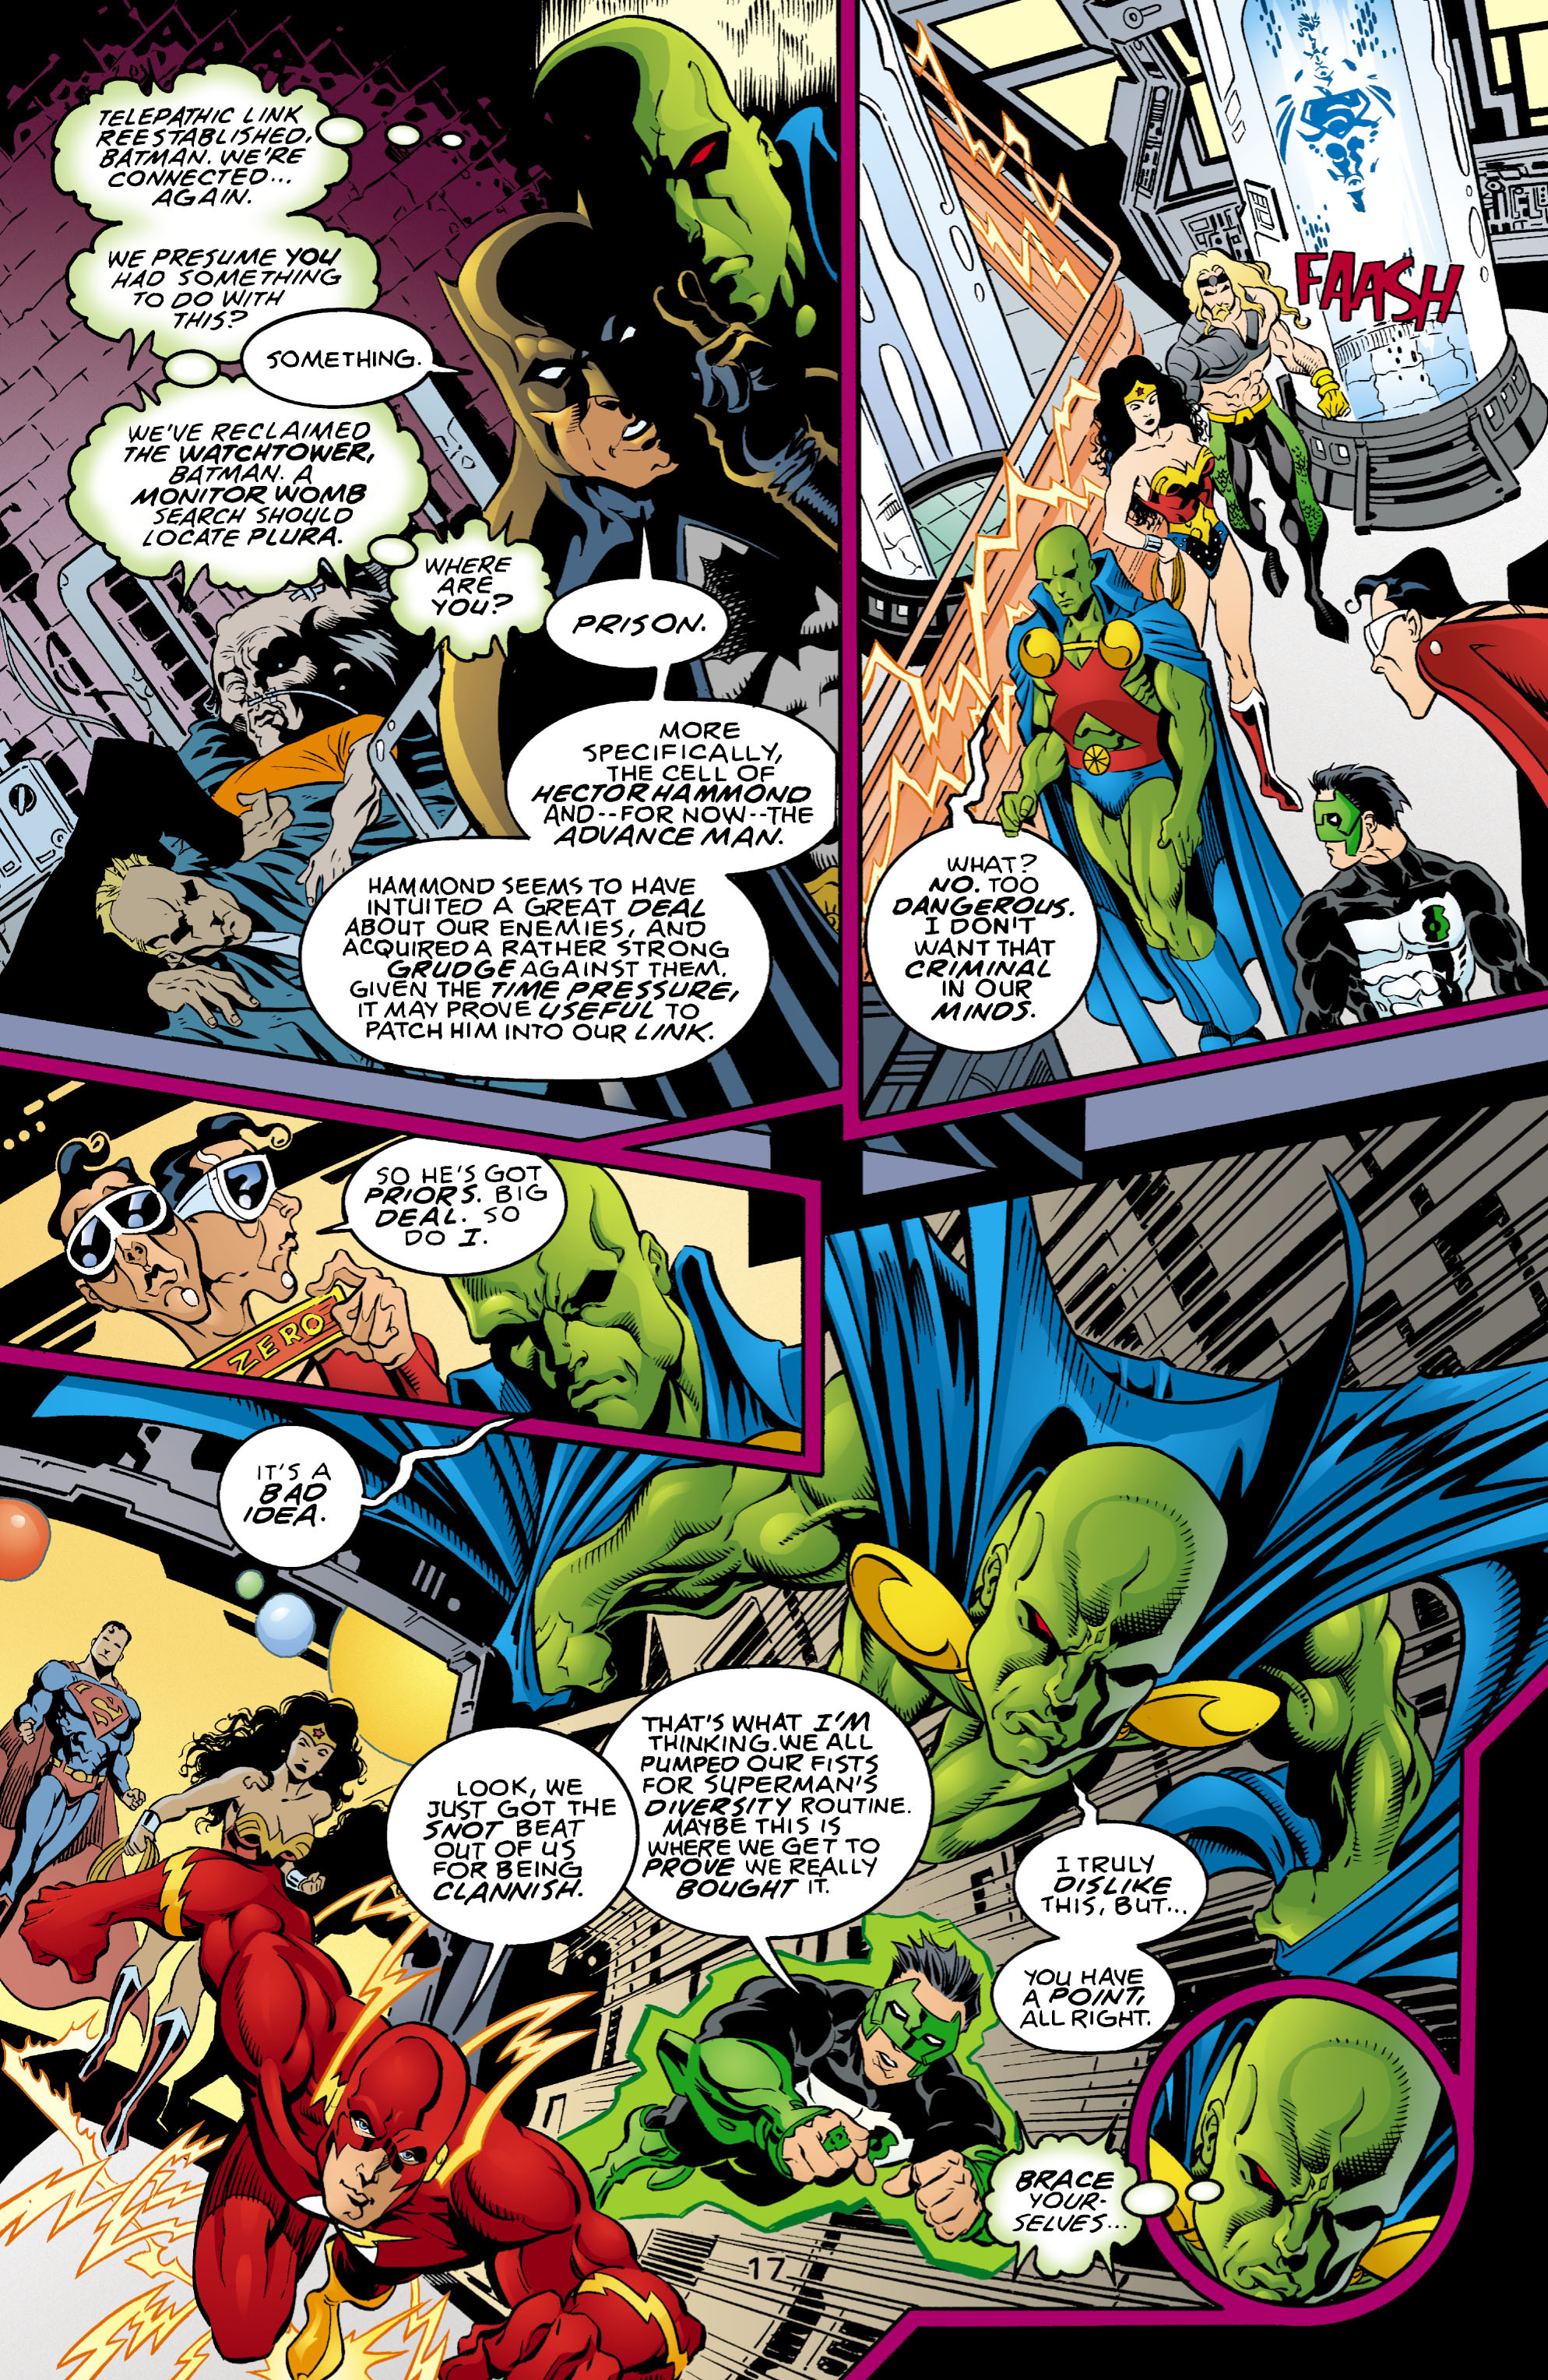 Read online Justice Leagues: JLA comic -  Issue # Full - 17